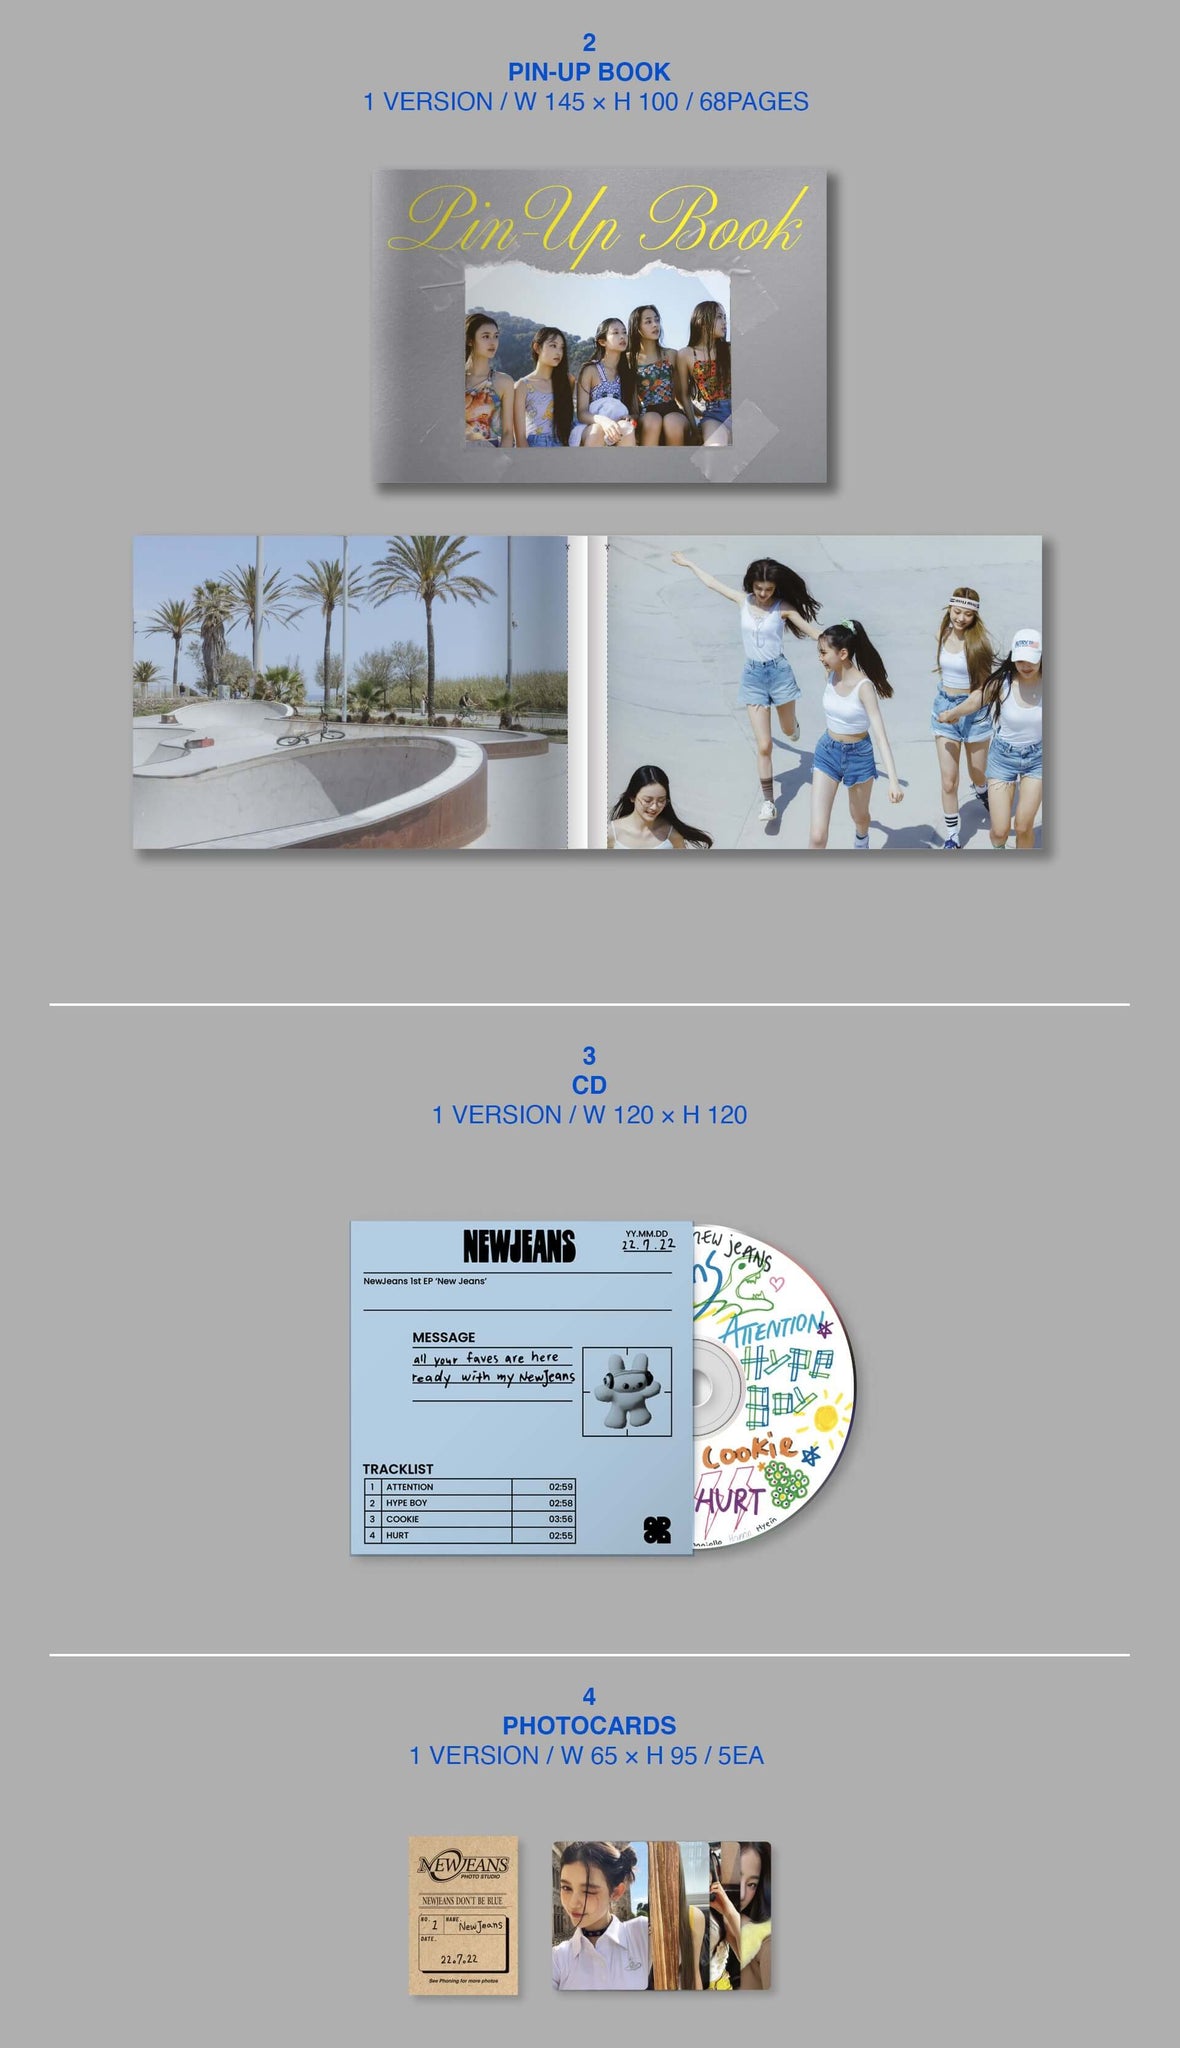 NewJeans 1st Mini Album New Jeans Bag - White Version Inclusions Pin-up Book CD Photocards